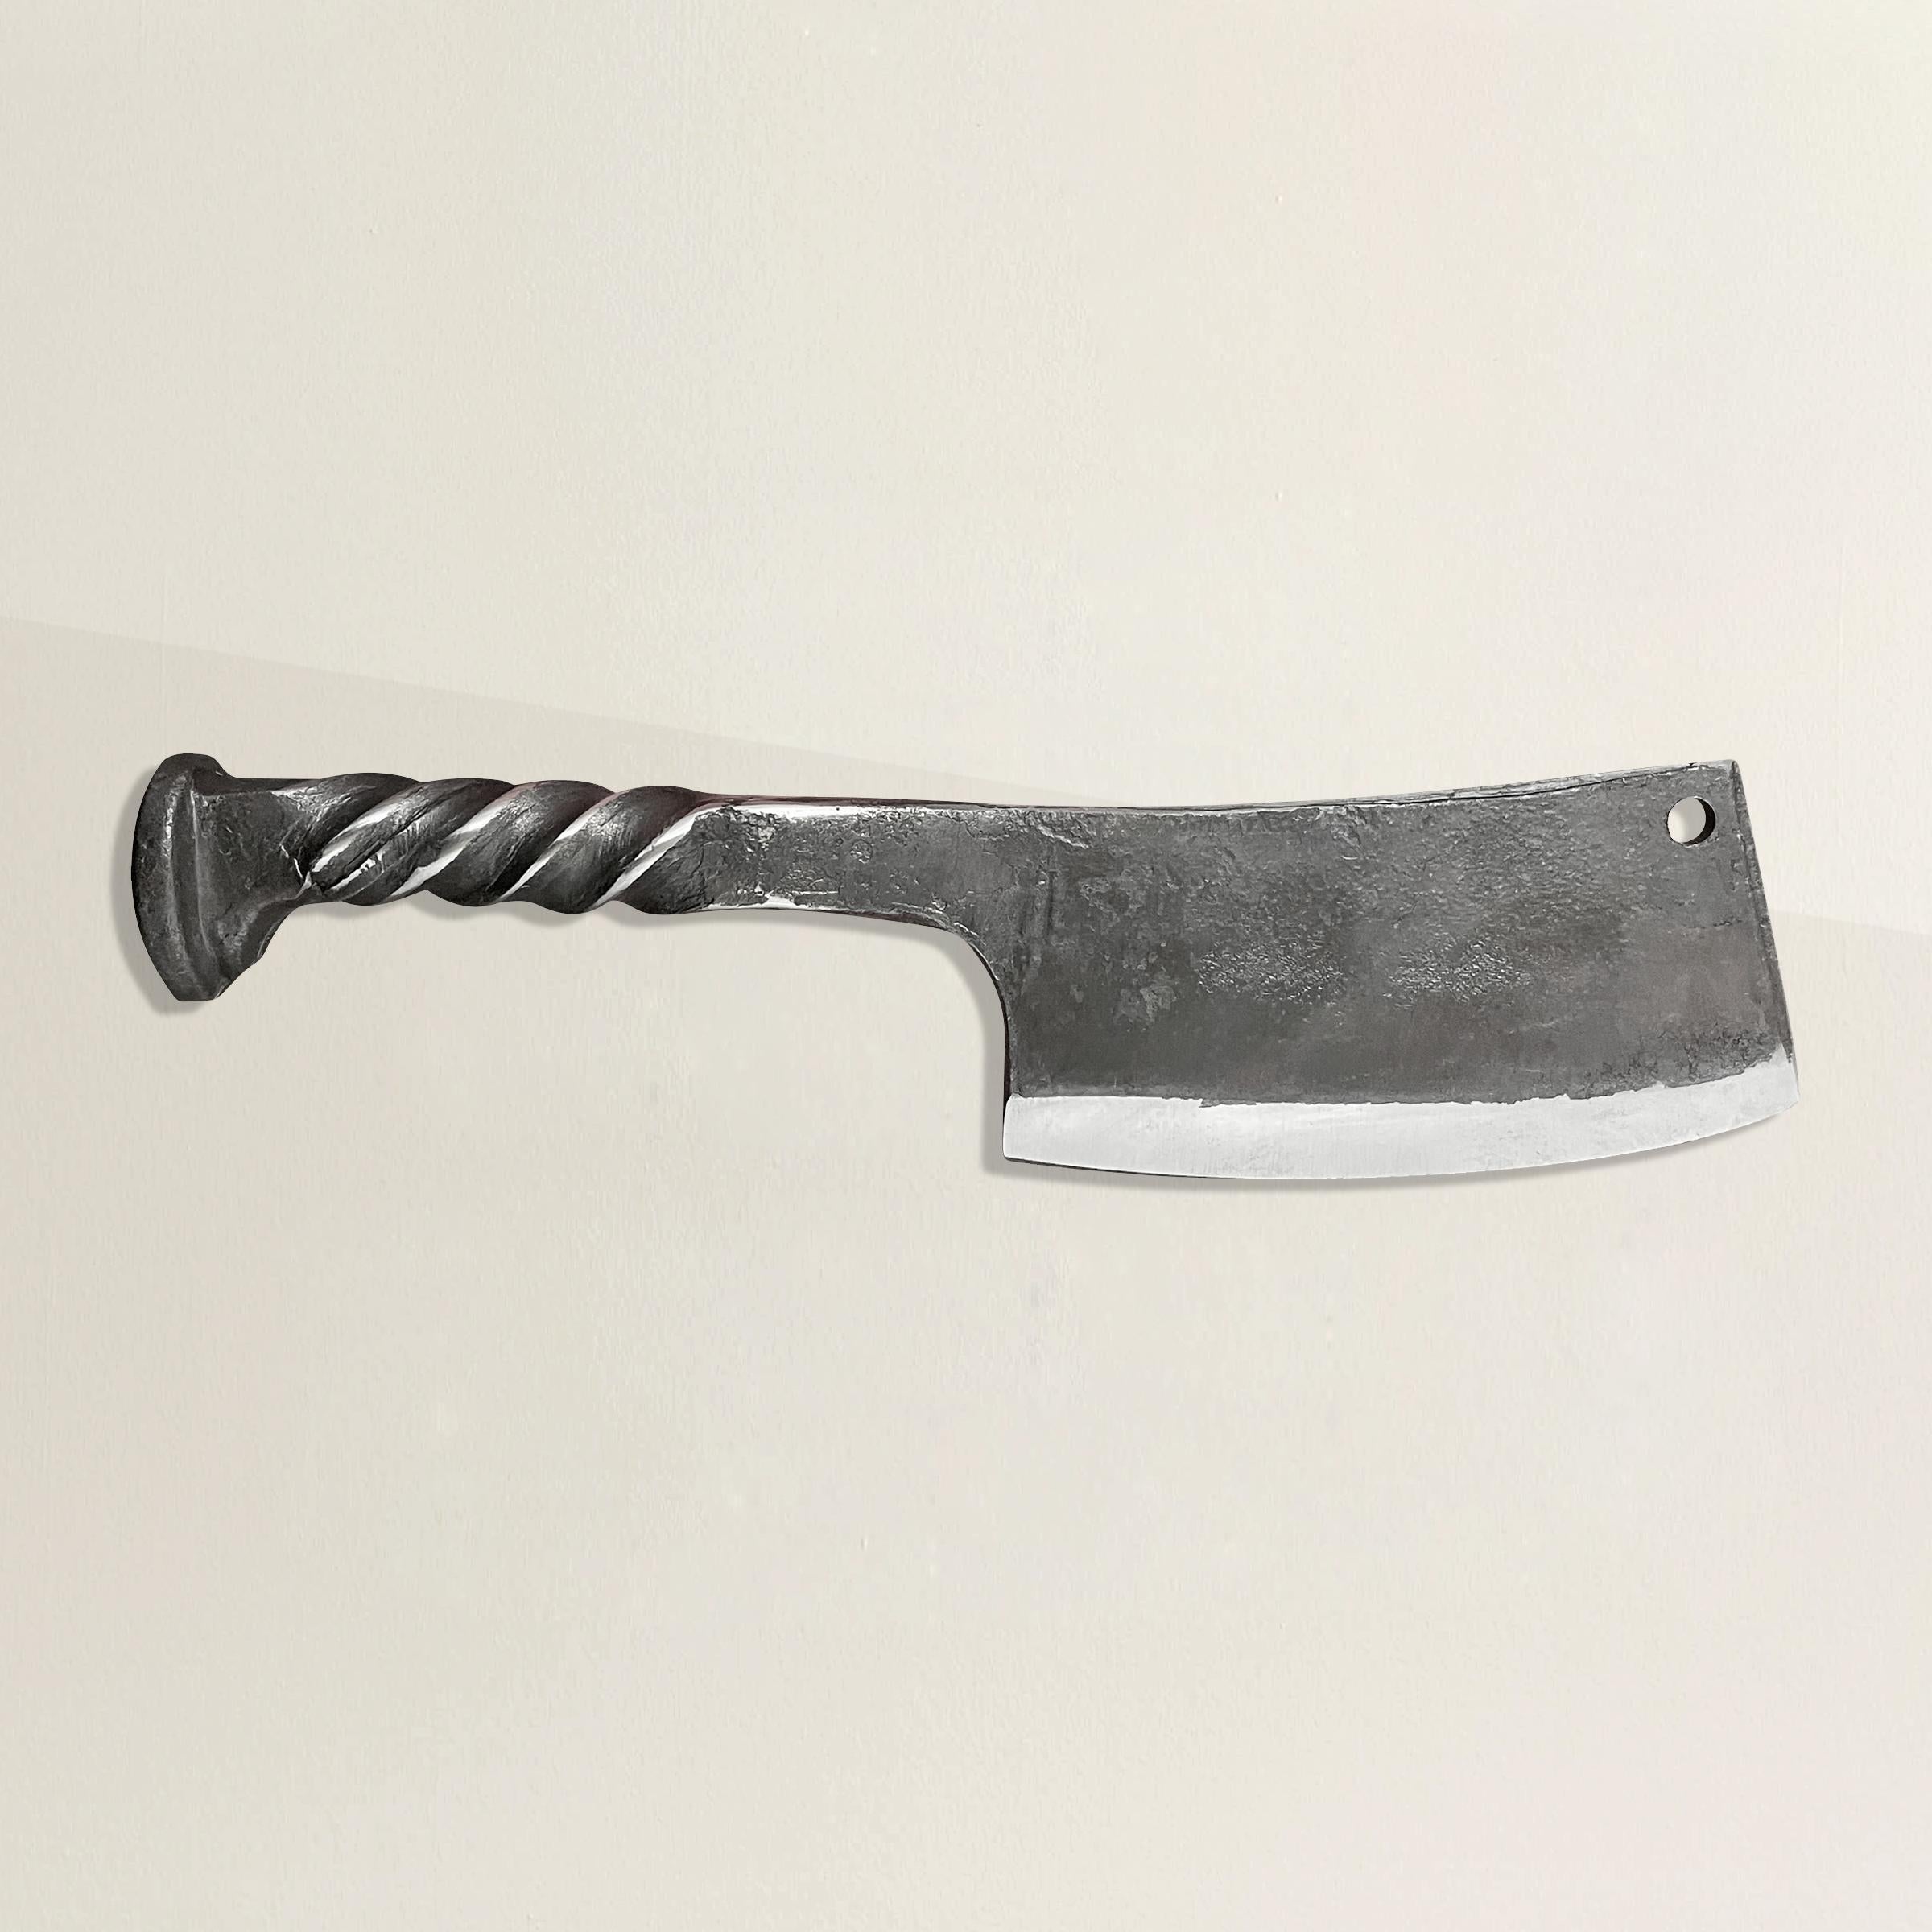 A handsome hand-wrought iron butcher's knife with a handle made from a railroad spike, and a thin sharpened blade. Perfect for slicing cheese and charcuterie at your next fête!